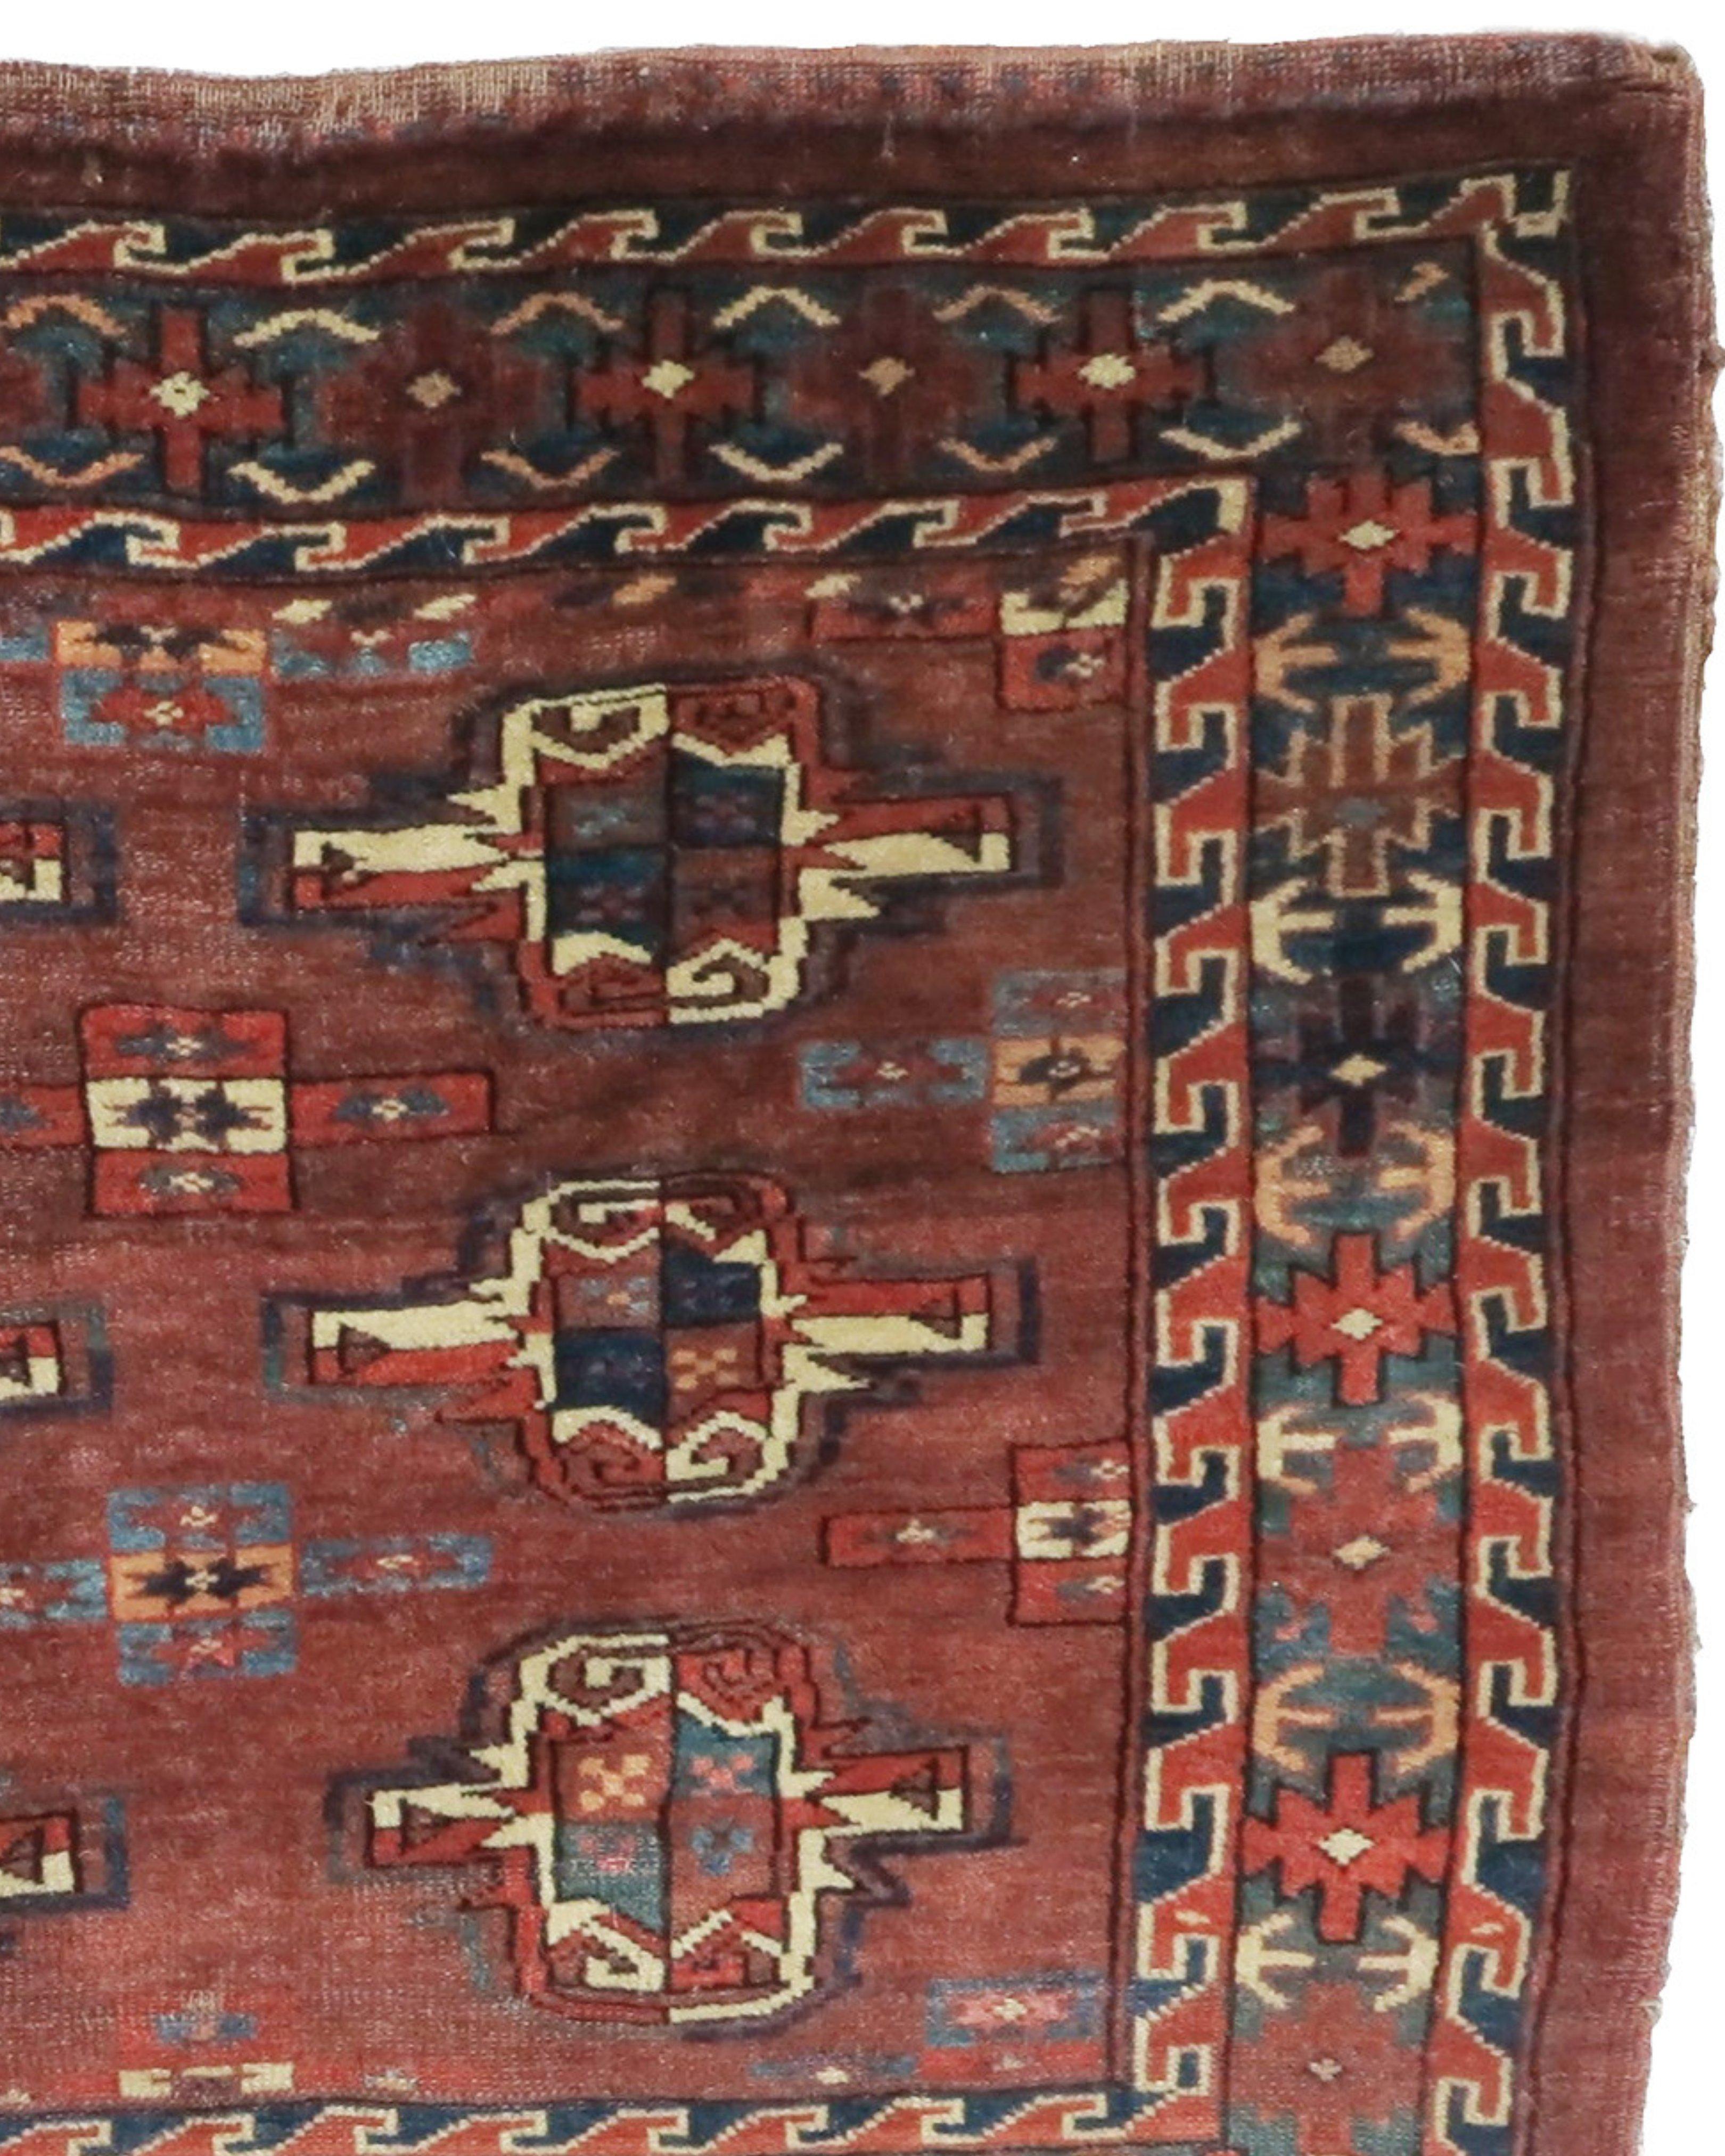 Yomut Chuval Rug, Mid-19th Century

Additional Information:
Dimensions: 2'3